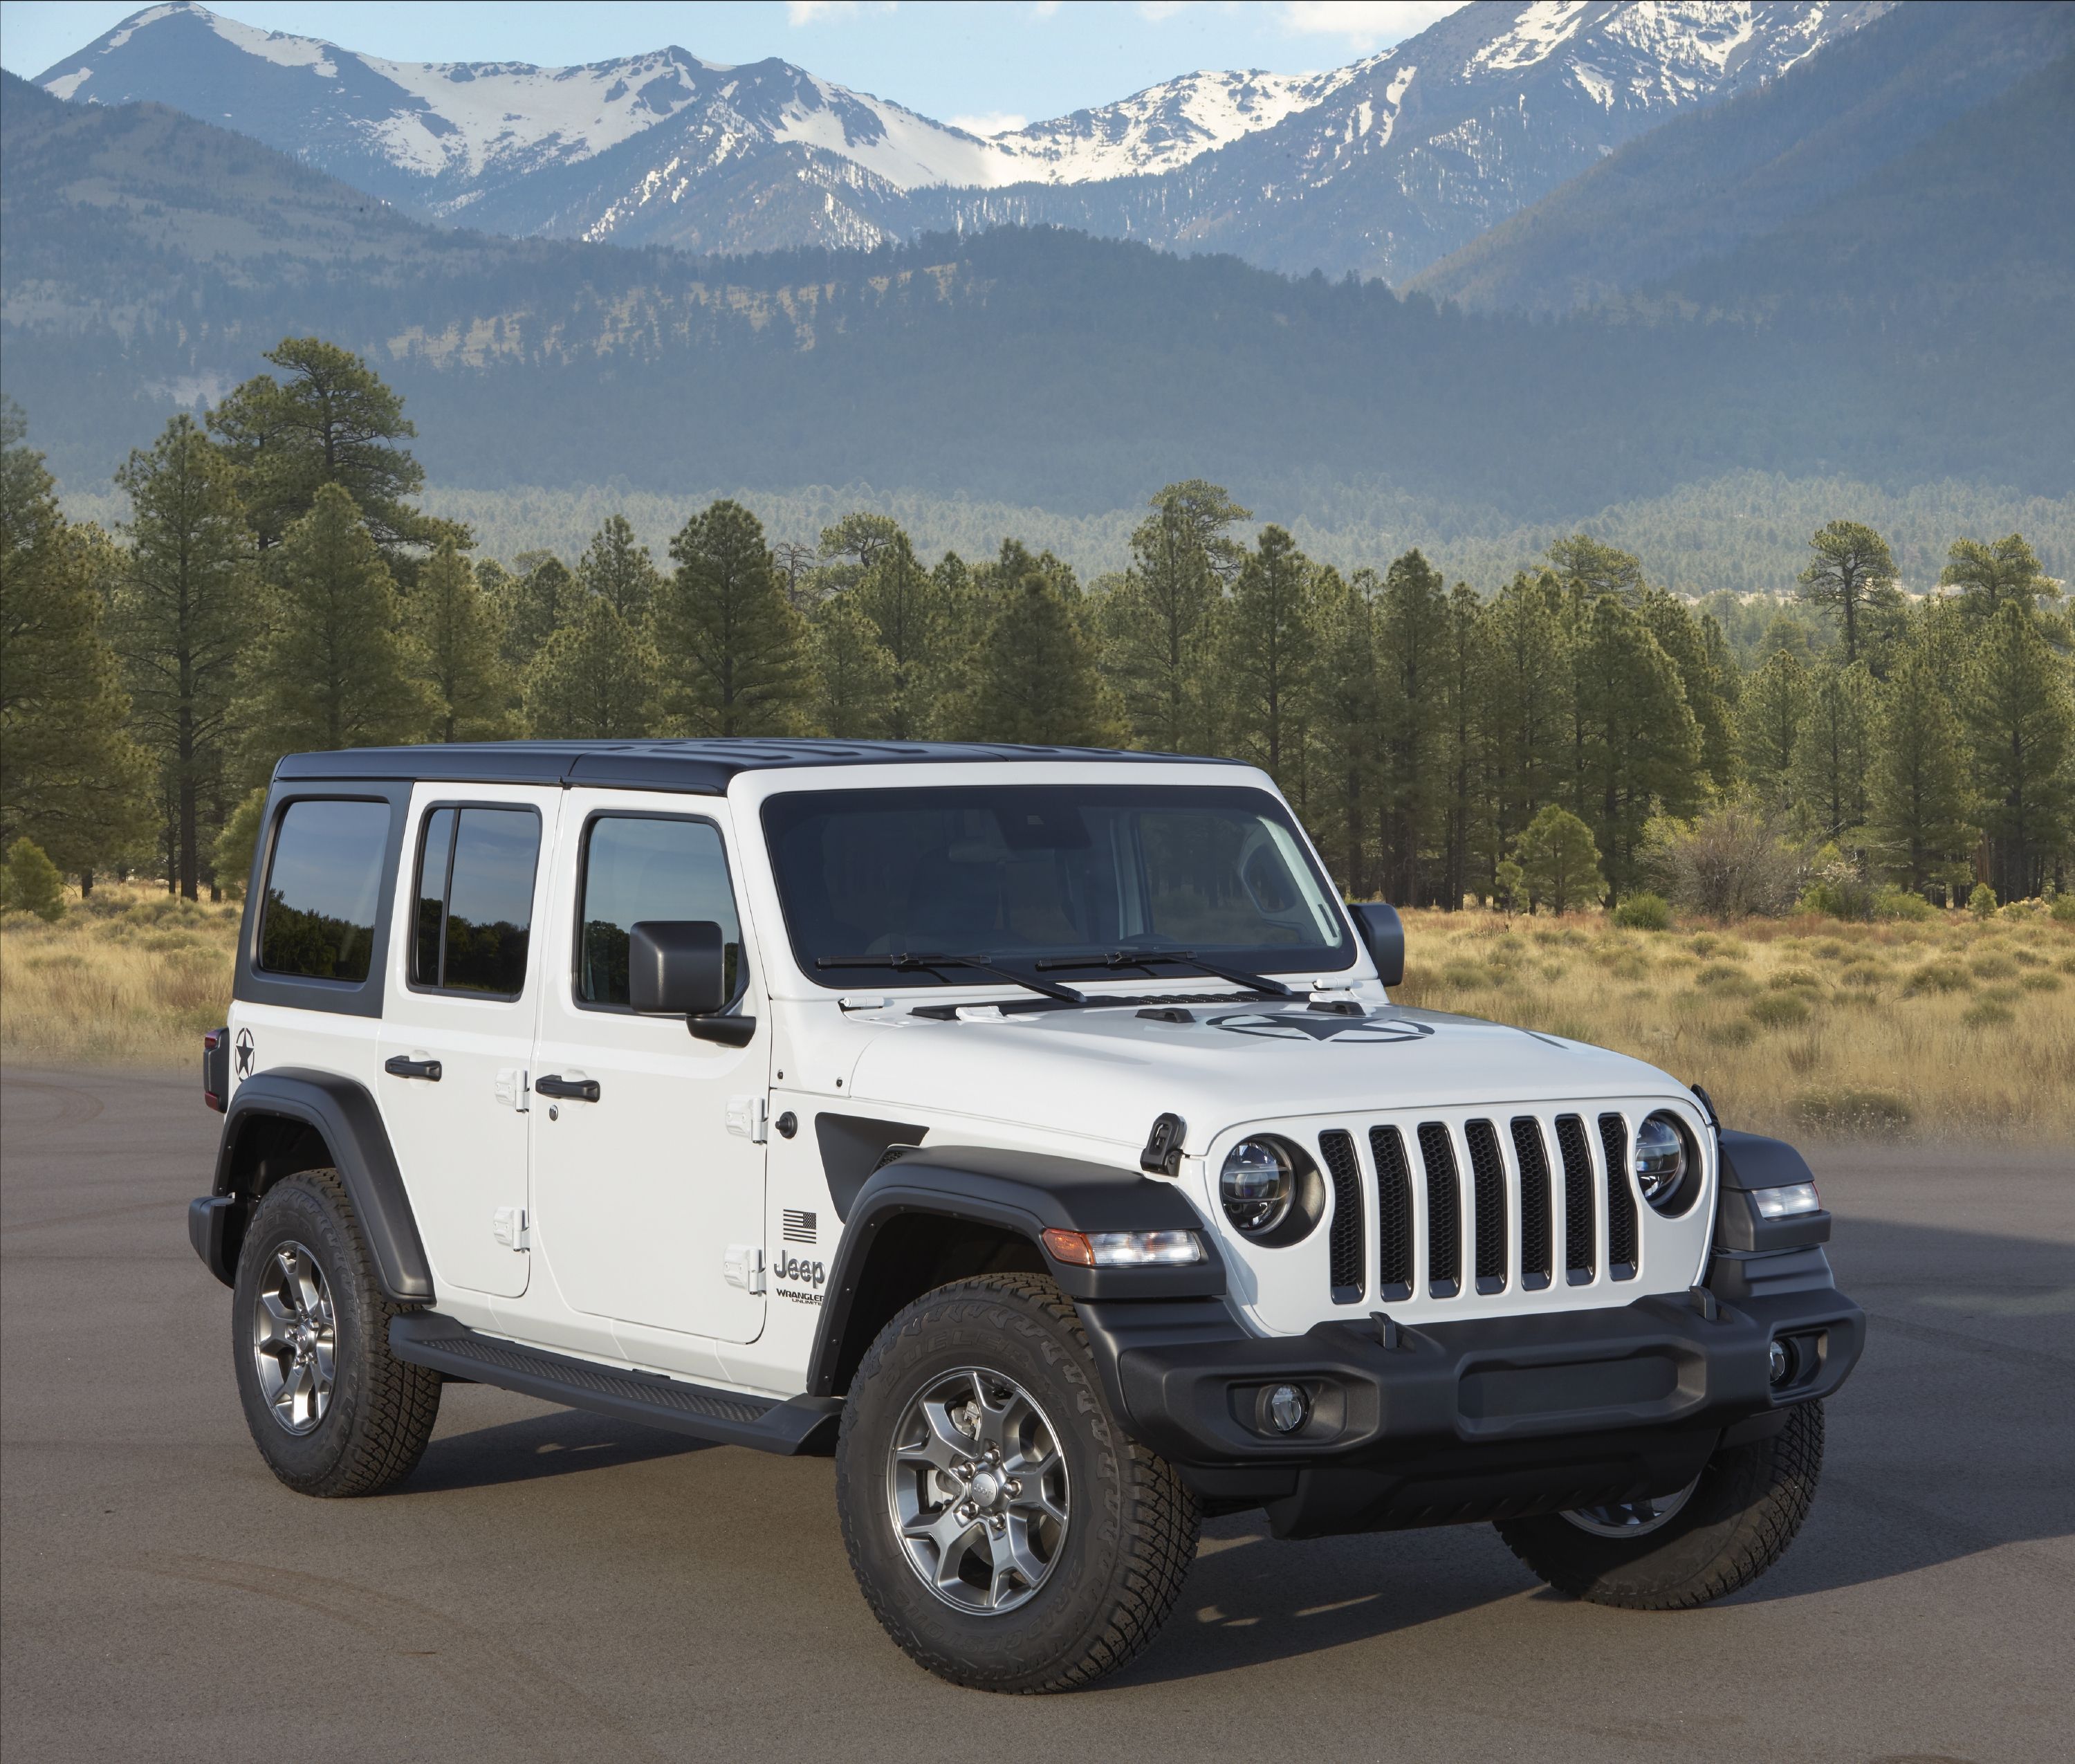 Jeep Brings Back Wrangler Freedom Edition as Armed Forces Tribute